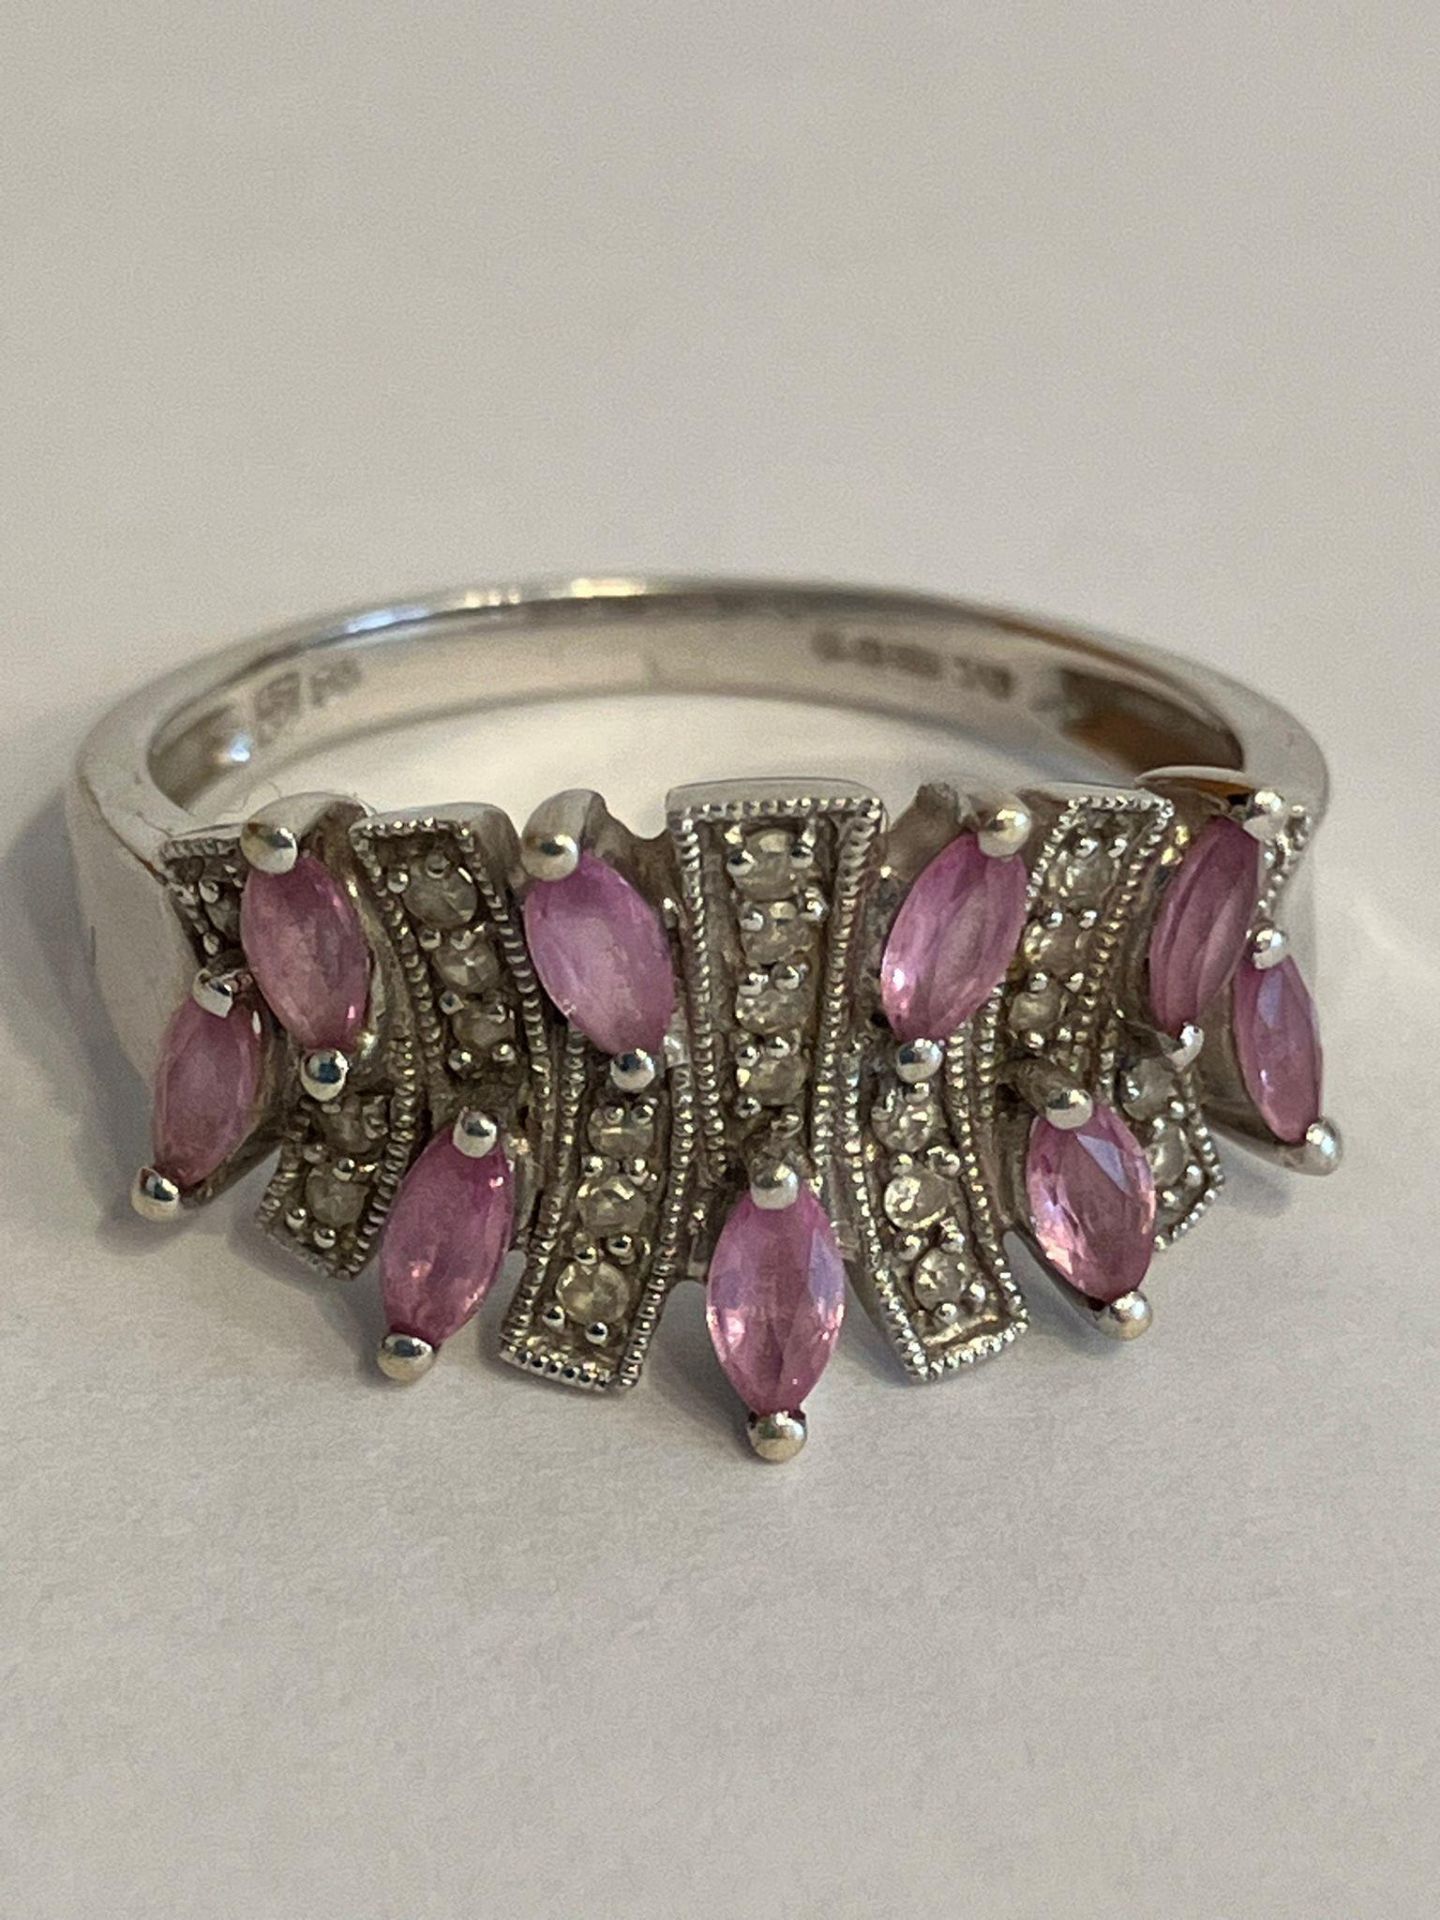 An absolutely exquisite 9 carat WHITE GOLD RING set with PINK SAPPHIRES and DIAMONDS. 3.46 grams.